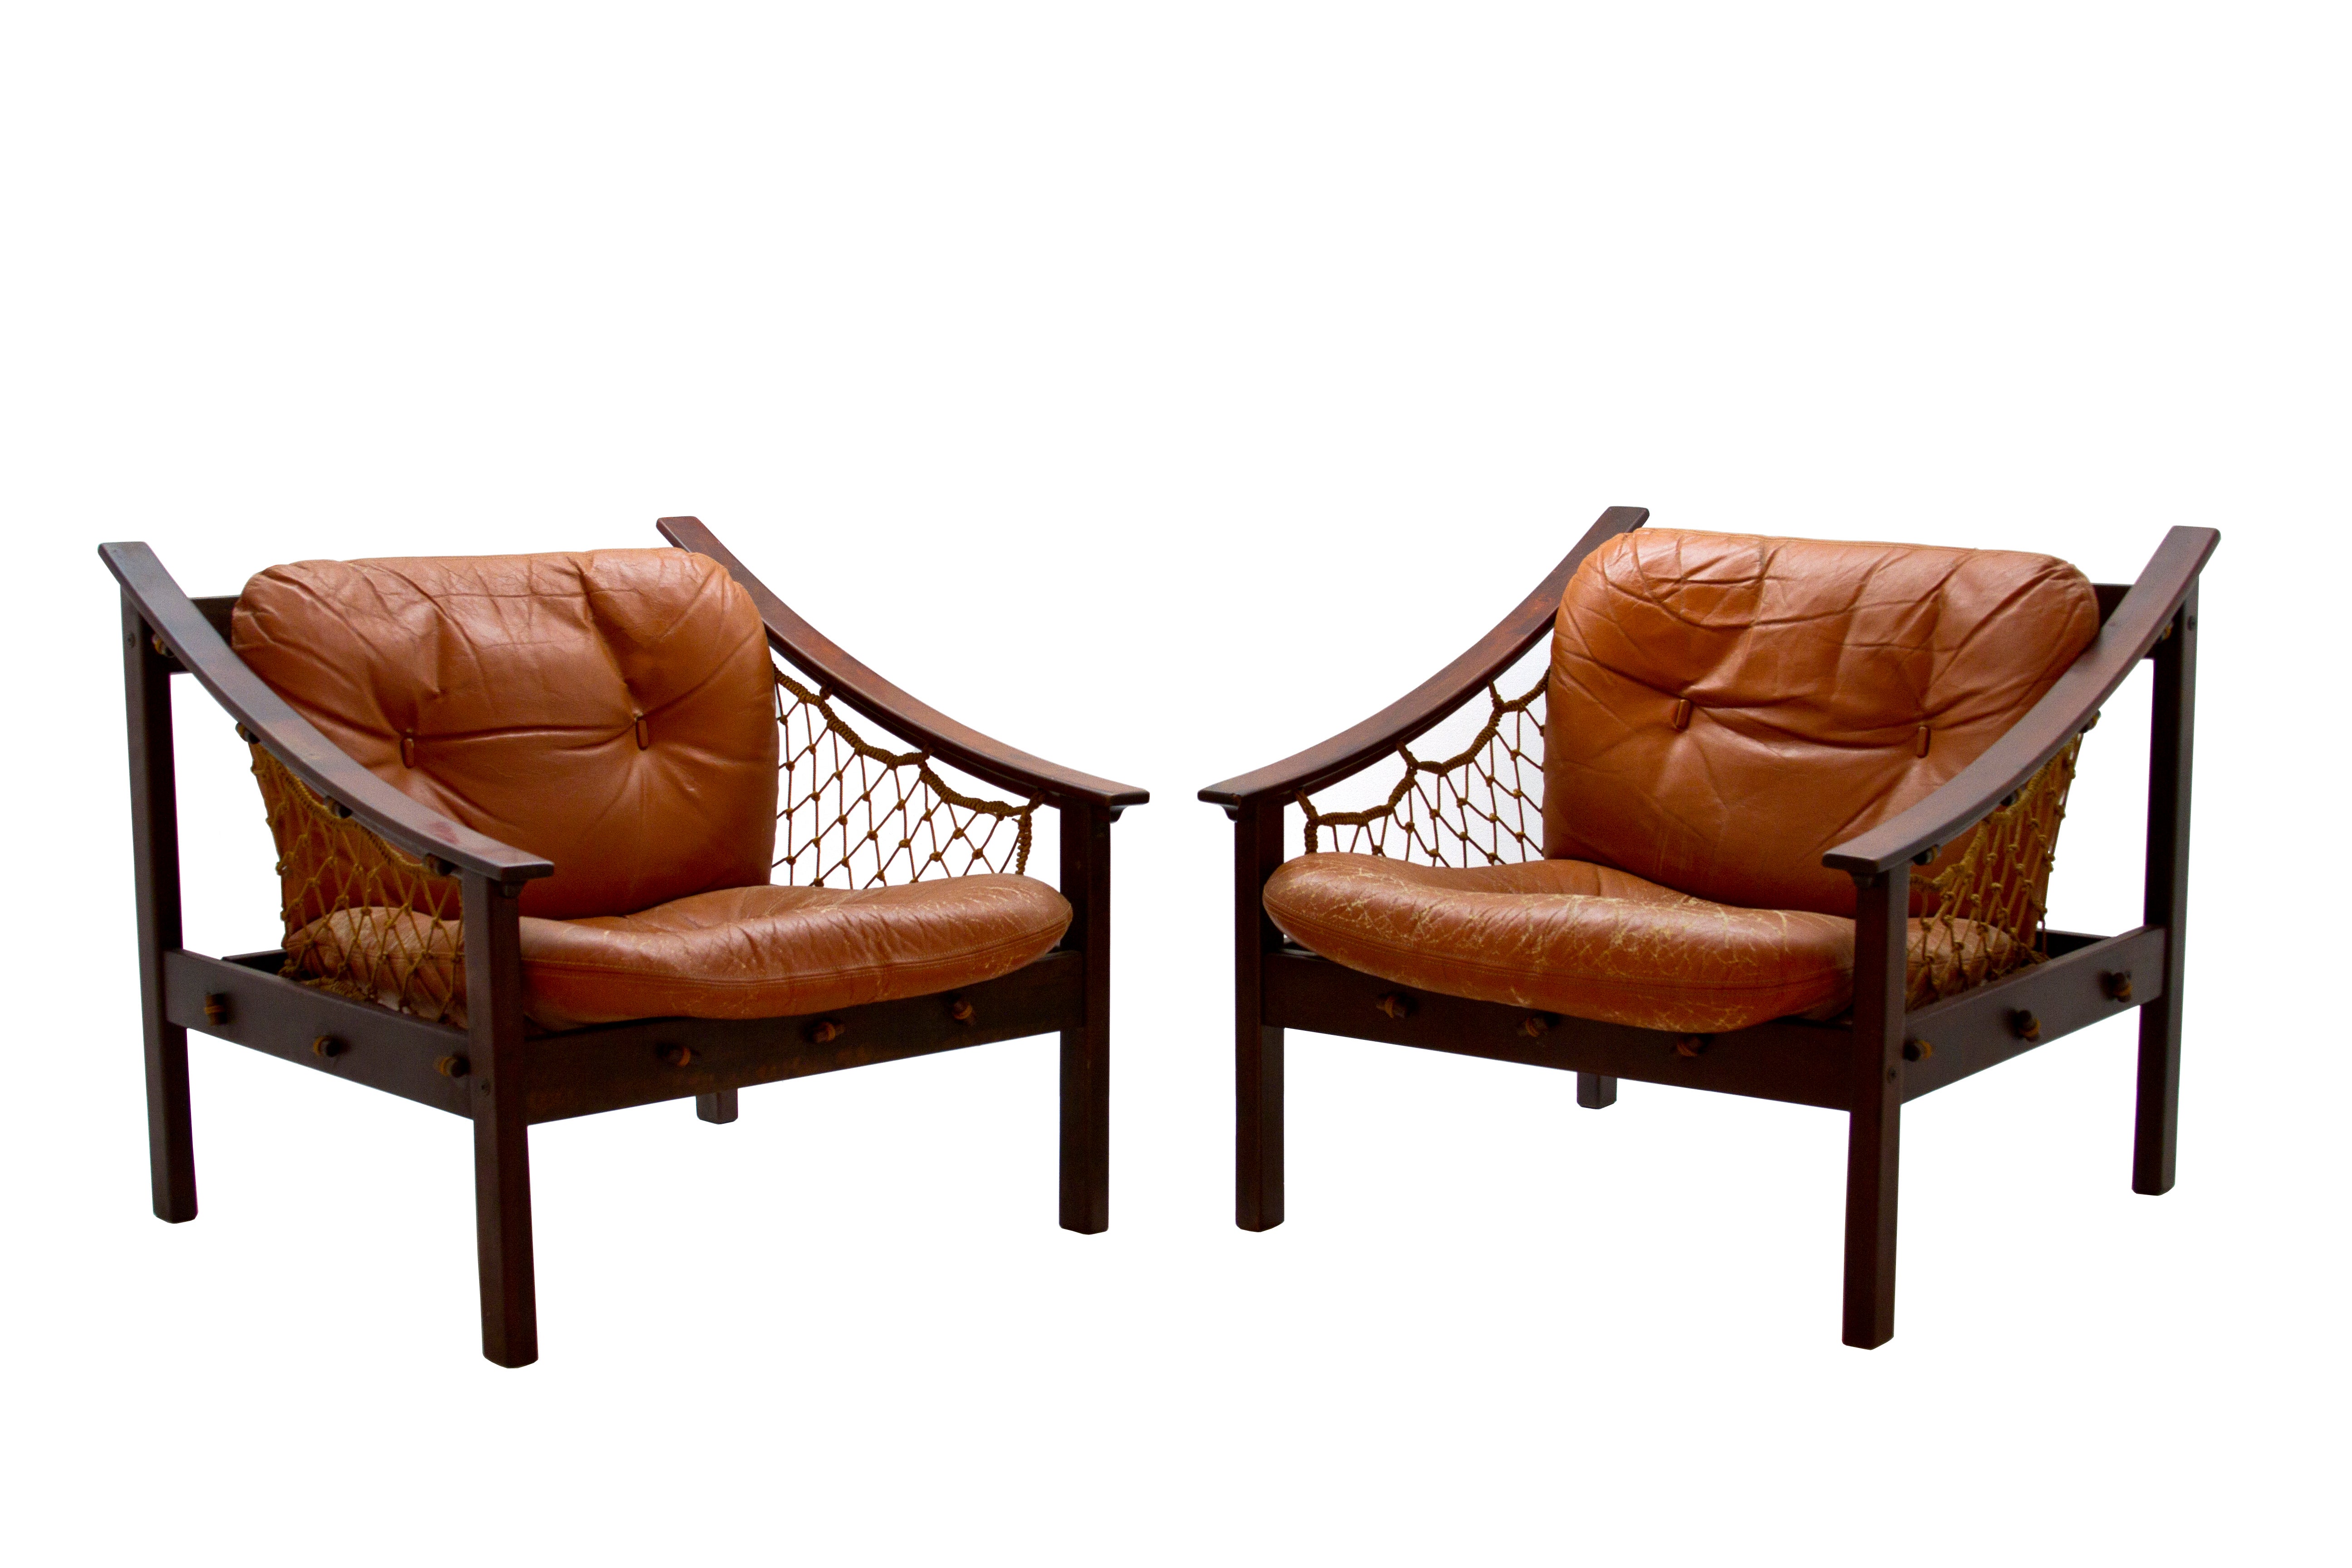 Pair of Vintage "Amazonas" Armchairs by Jean Gillon